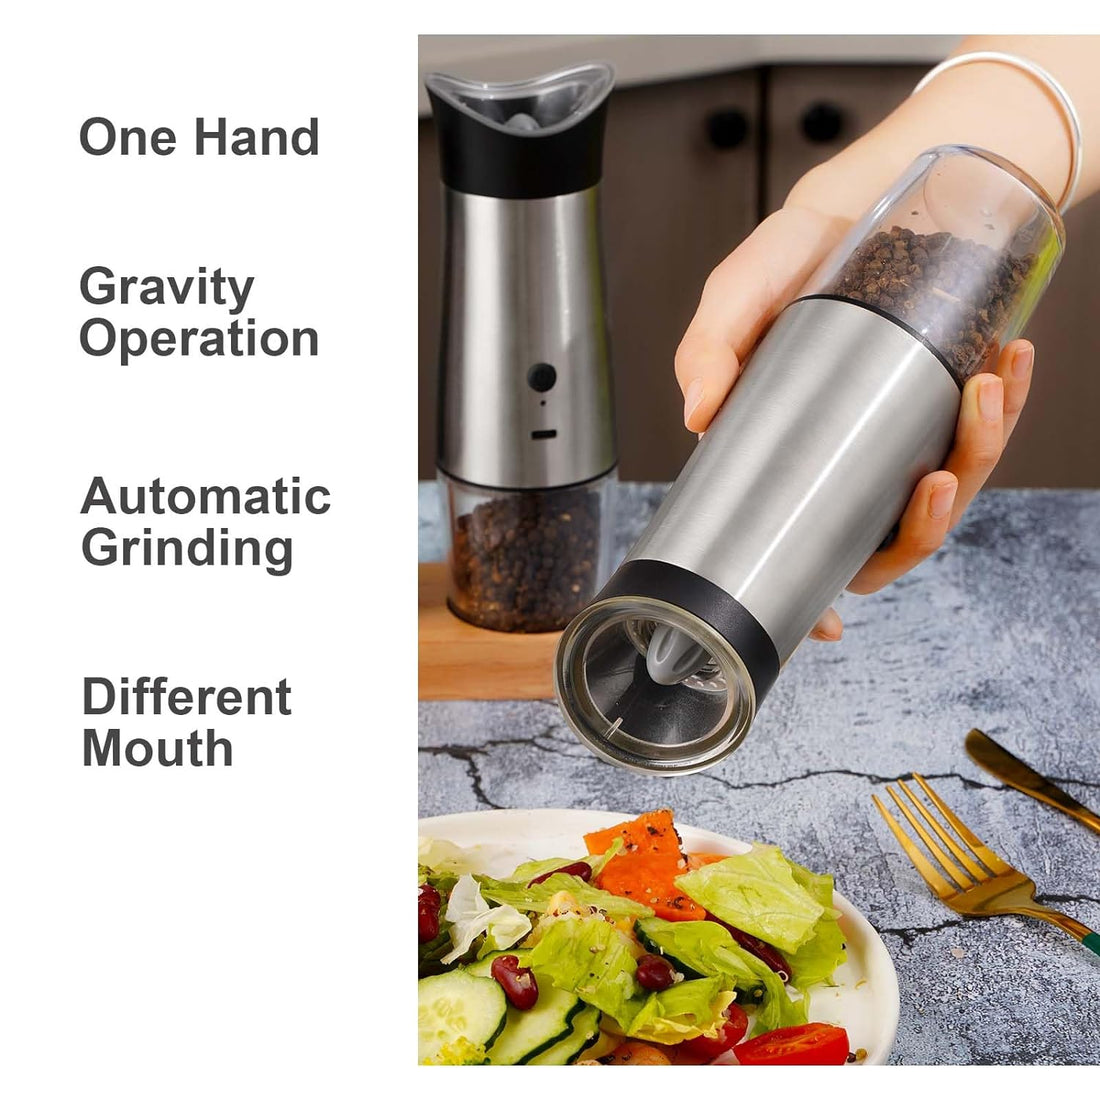 Electric Salt and Pepper Grinder Set, Onous Gravity Automatic Salt and Pepper Grinder Set Long Battery Life Pepper Mill Shakers, 2 Pack